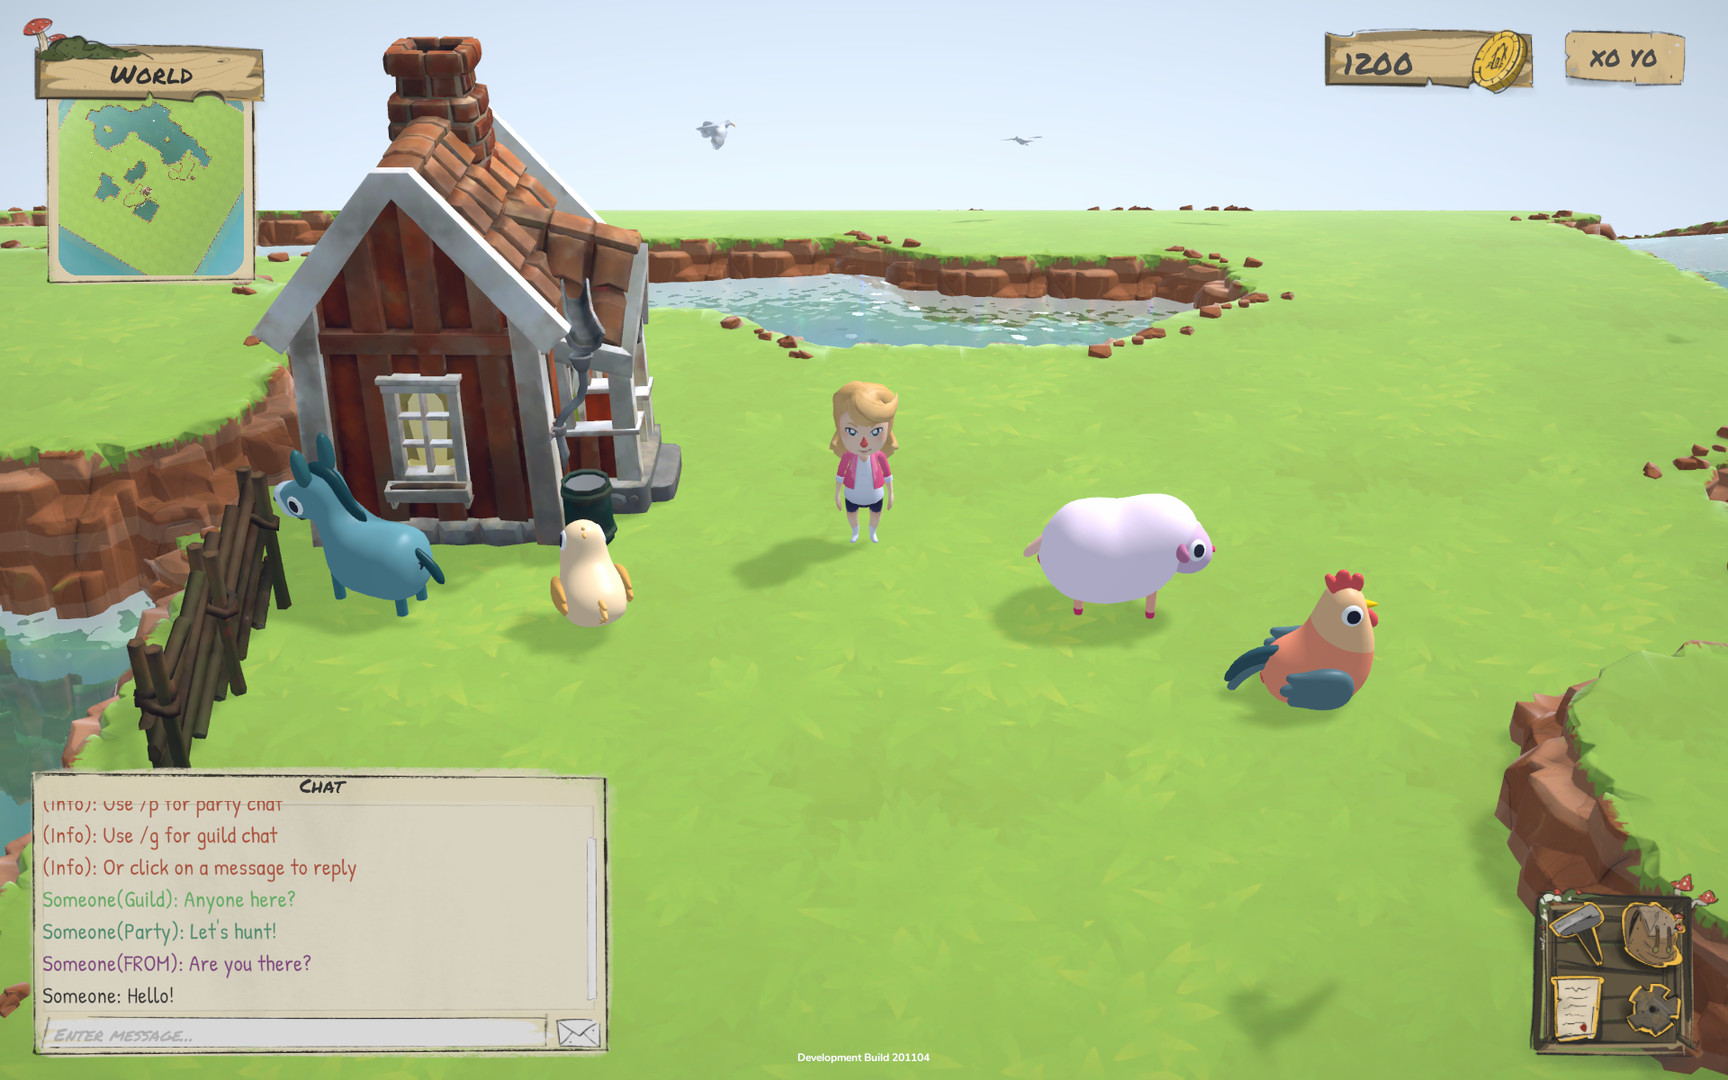 Play Metaverse Games. A farmer and four farm animals standing outside a house in the My Neighbor Alice metaverse game.